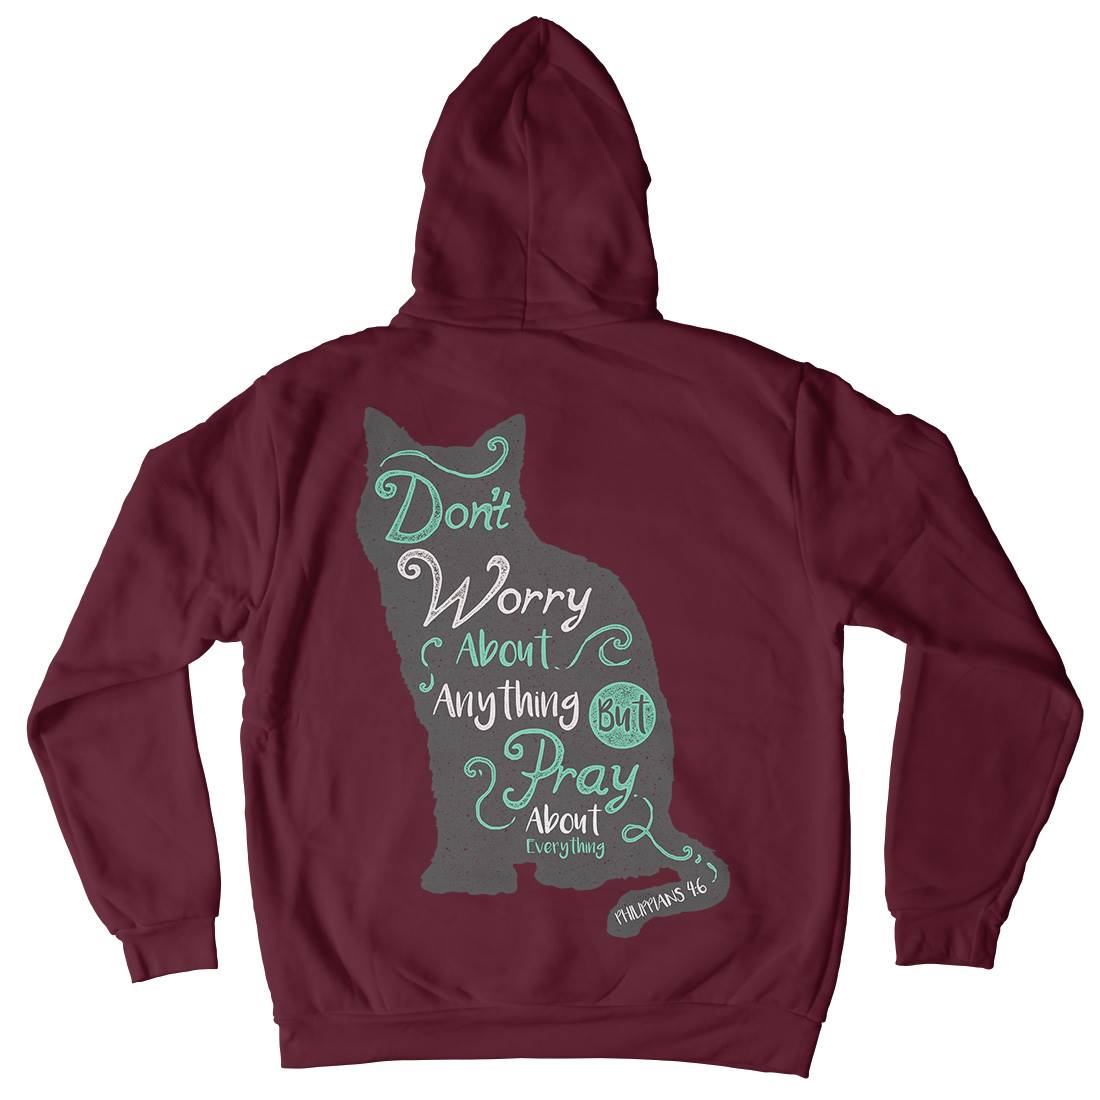 Pray For Everything Kids Crew Neck Hoodie Religion A360